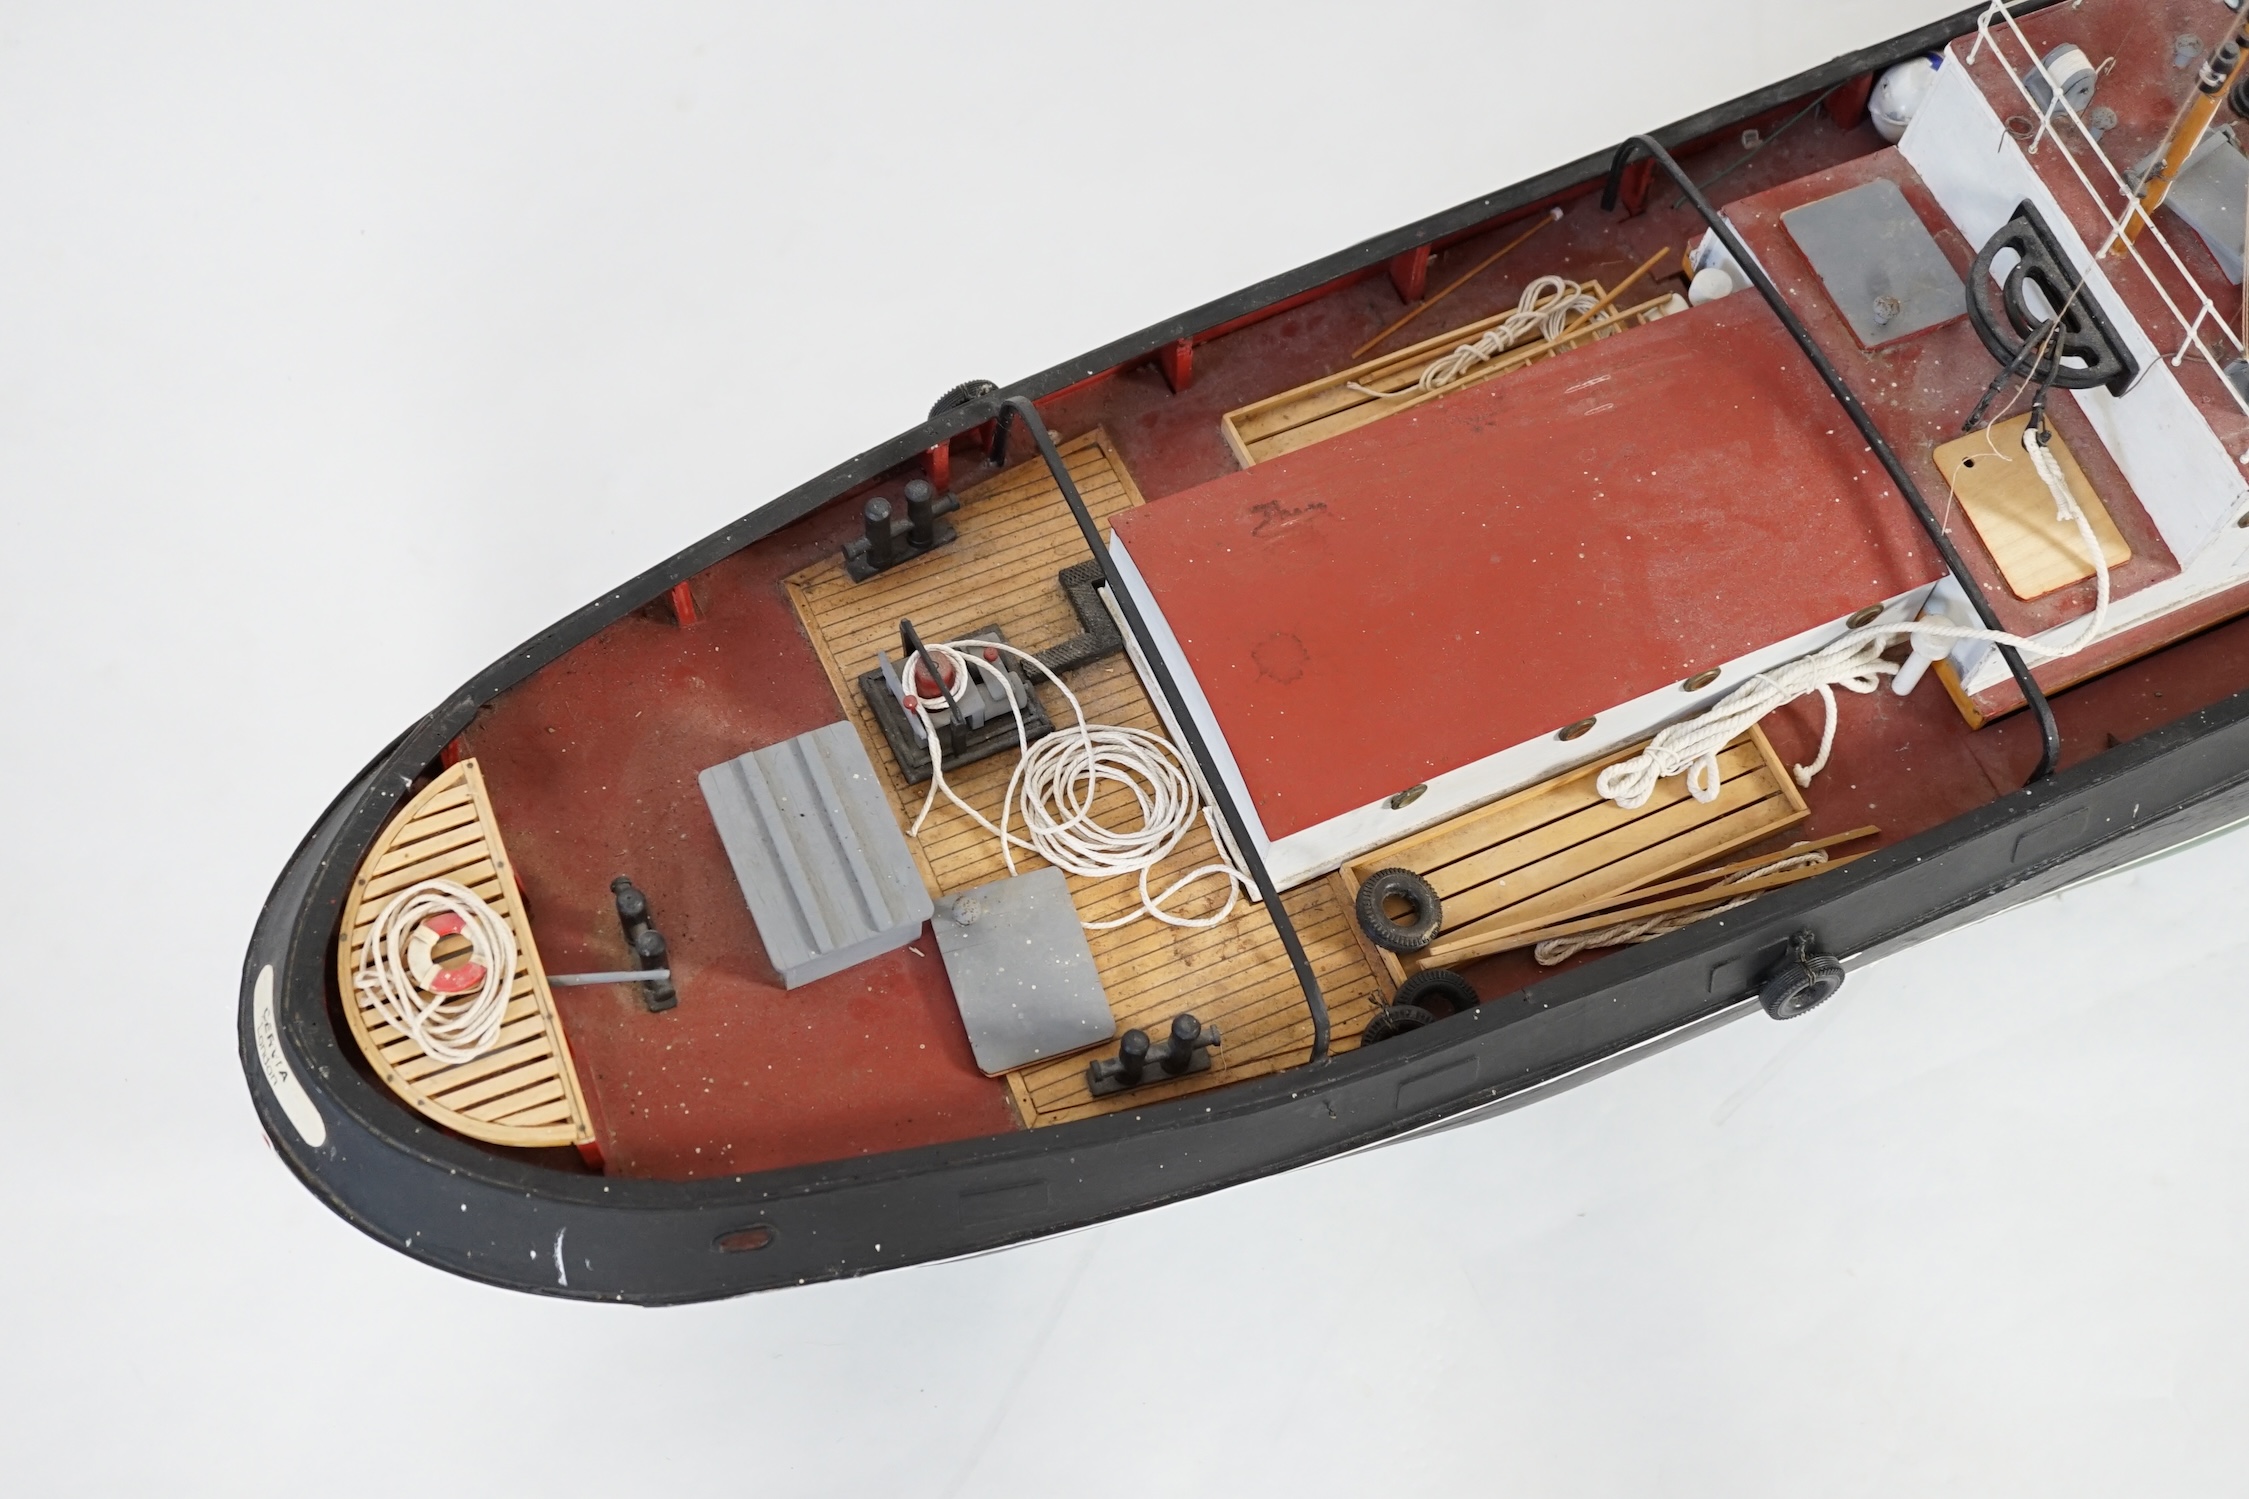 A kit built Maxwell Hemmens pond yacht style model of a 1930s Thames Tug after the firm Watkin & - Image 2 of 7